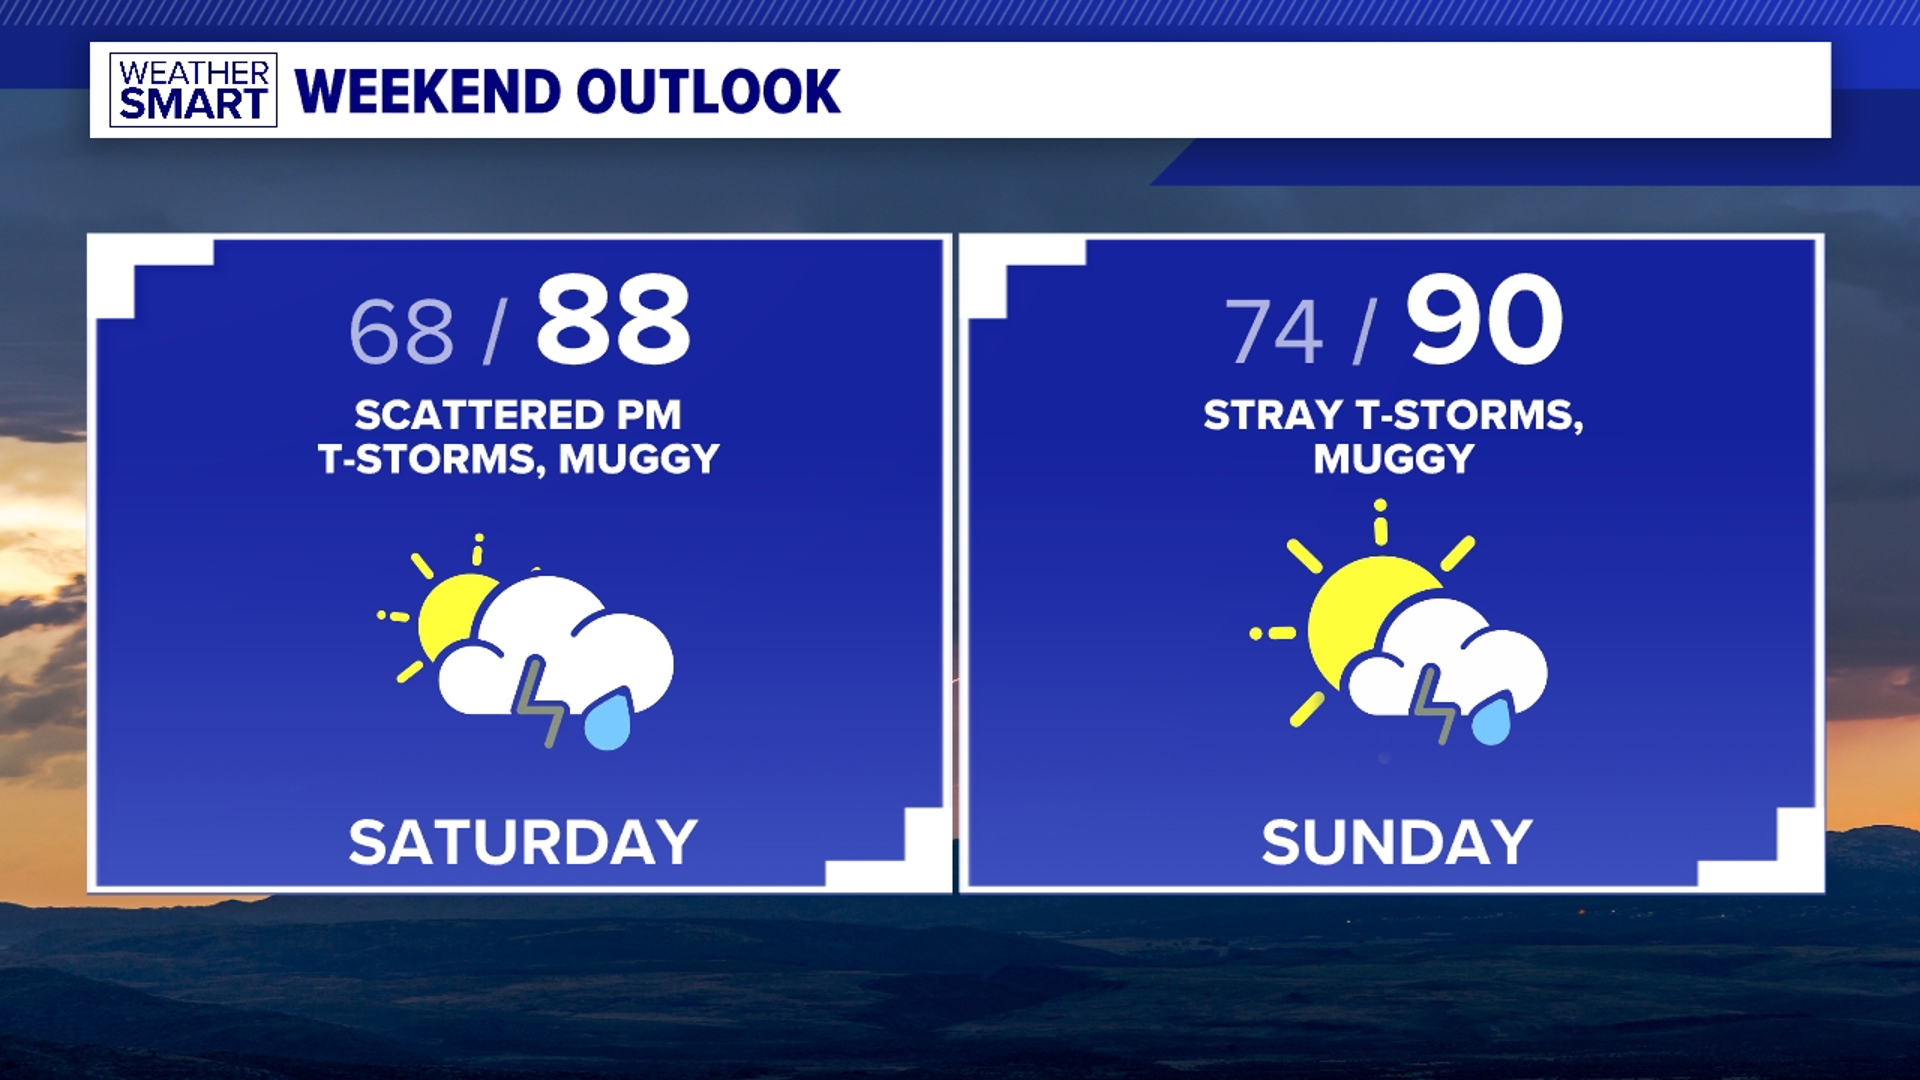 Tracking strong to severe thunderstorms this weekend.